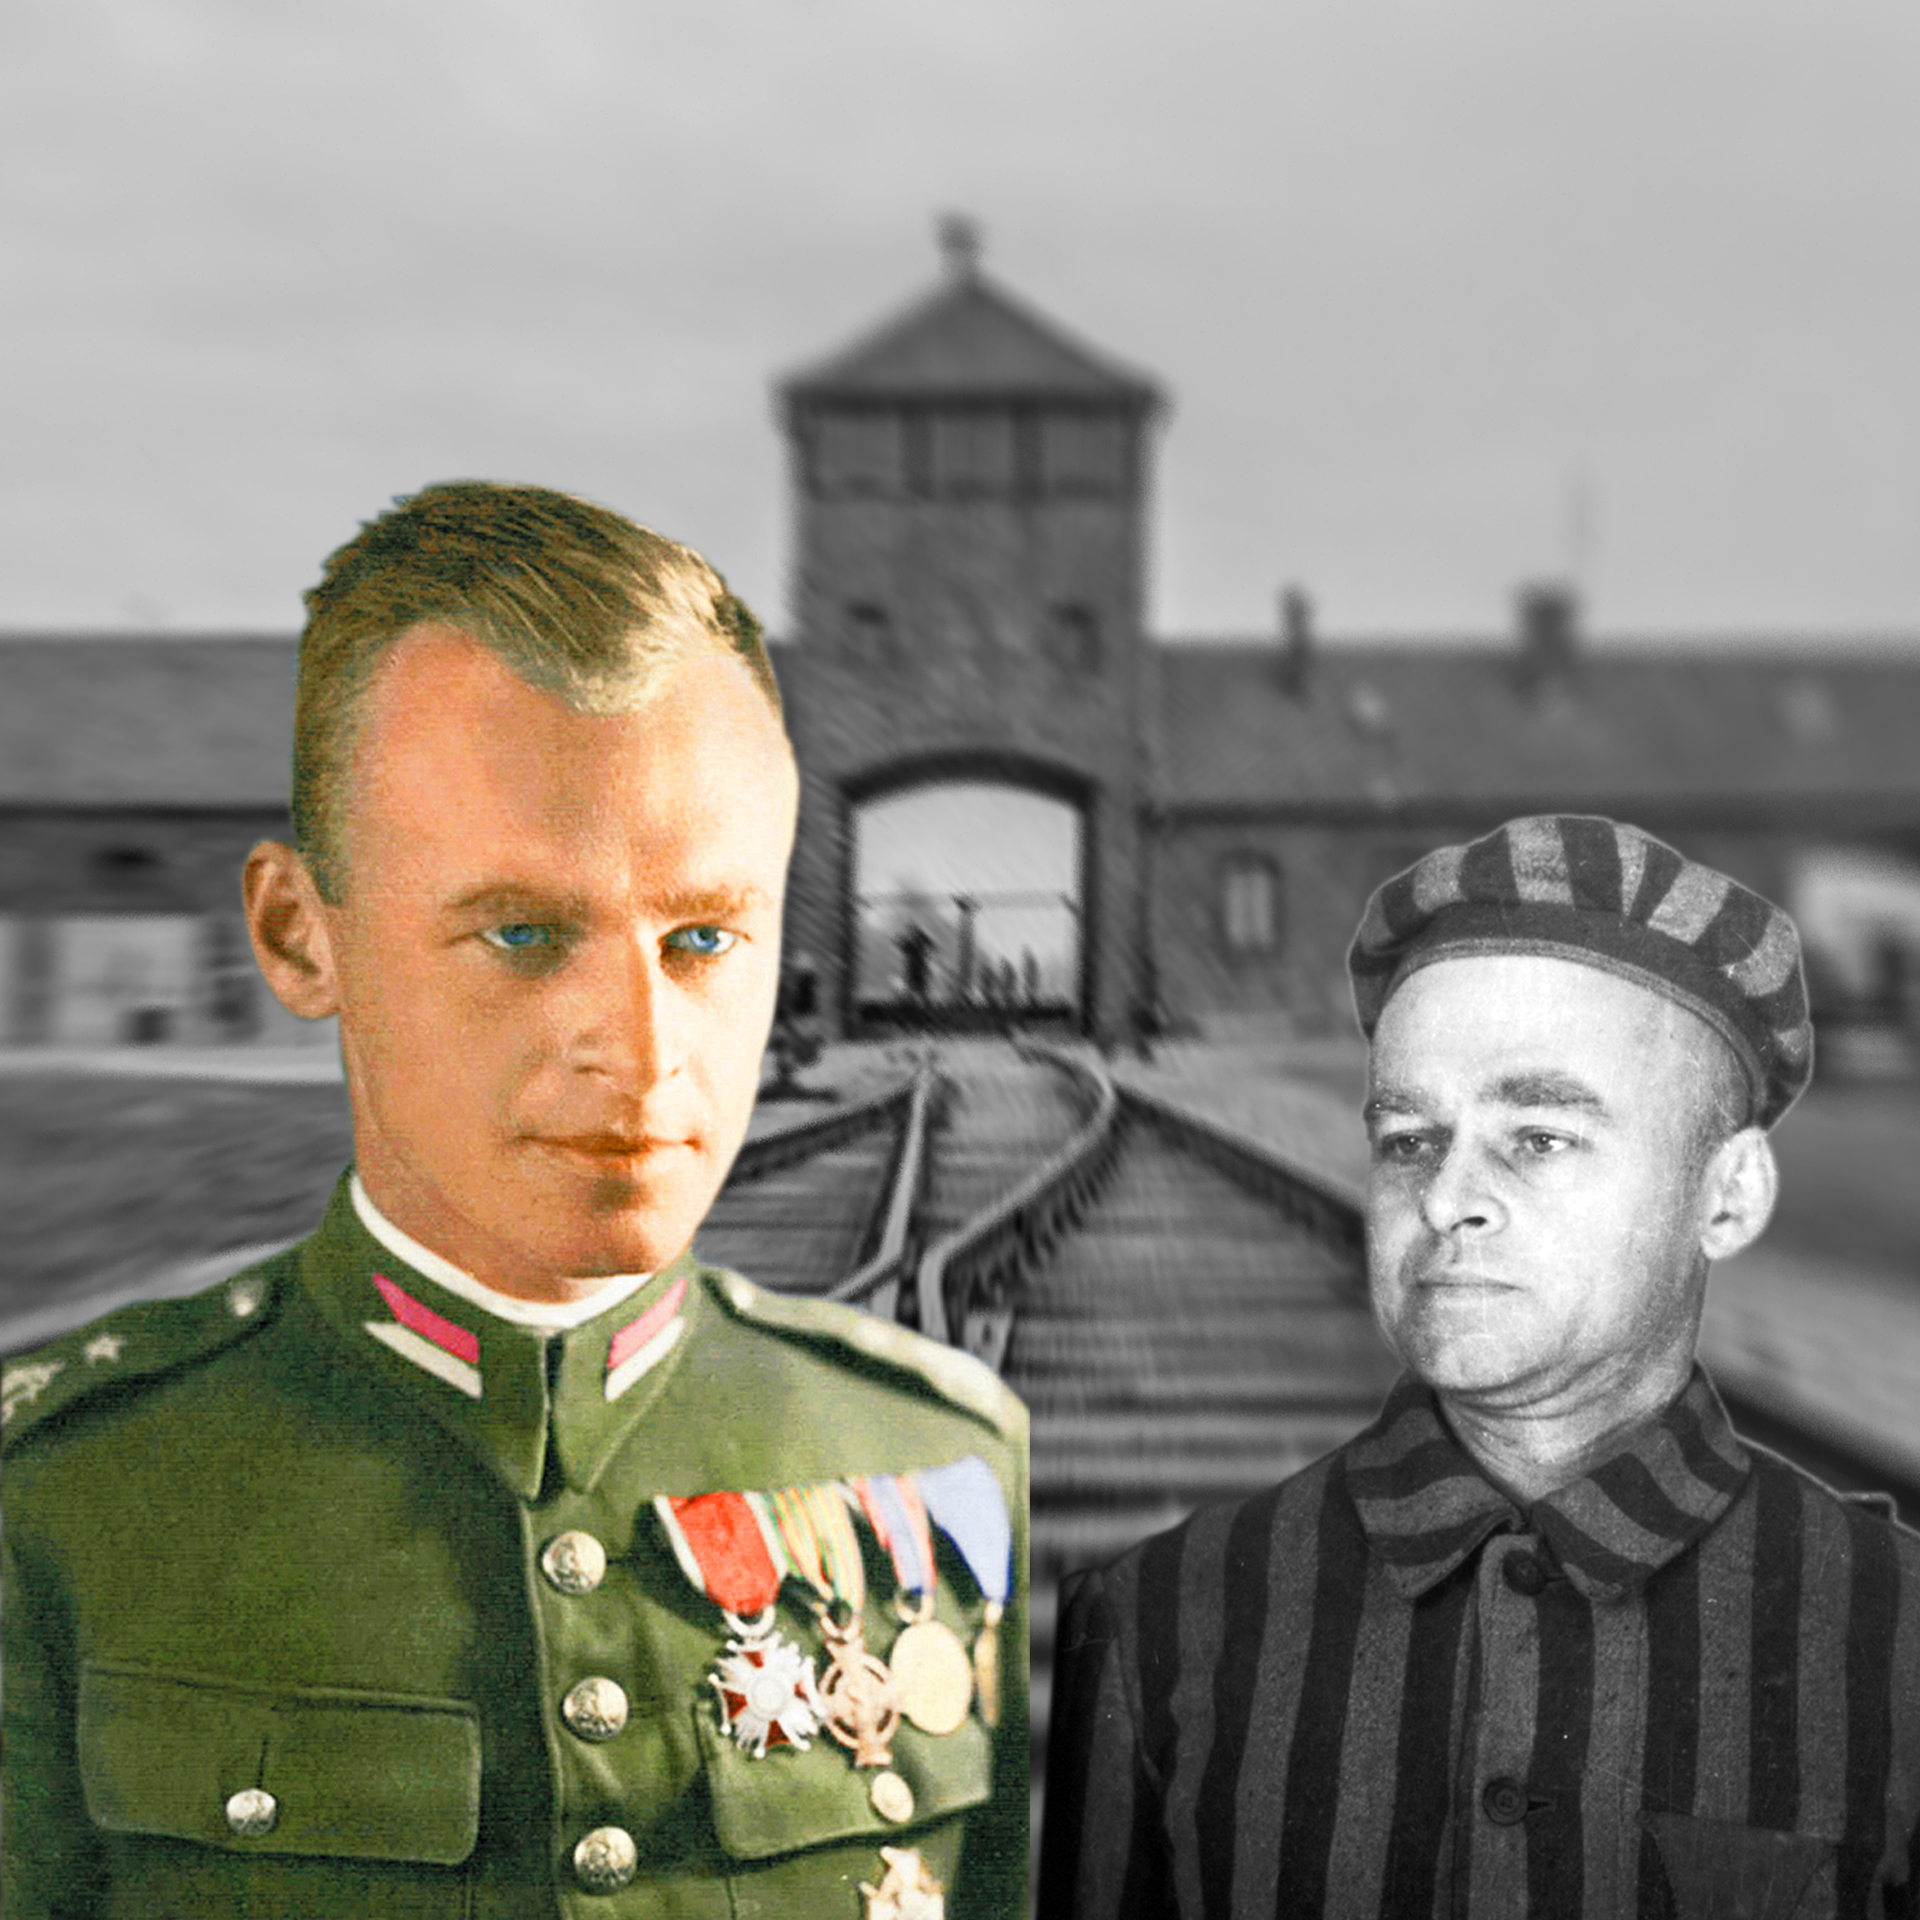 Witold Pilecki was born 118 years ago